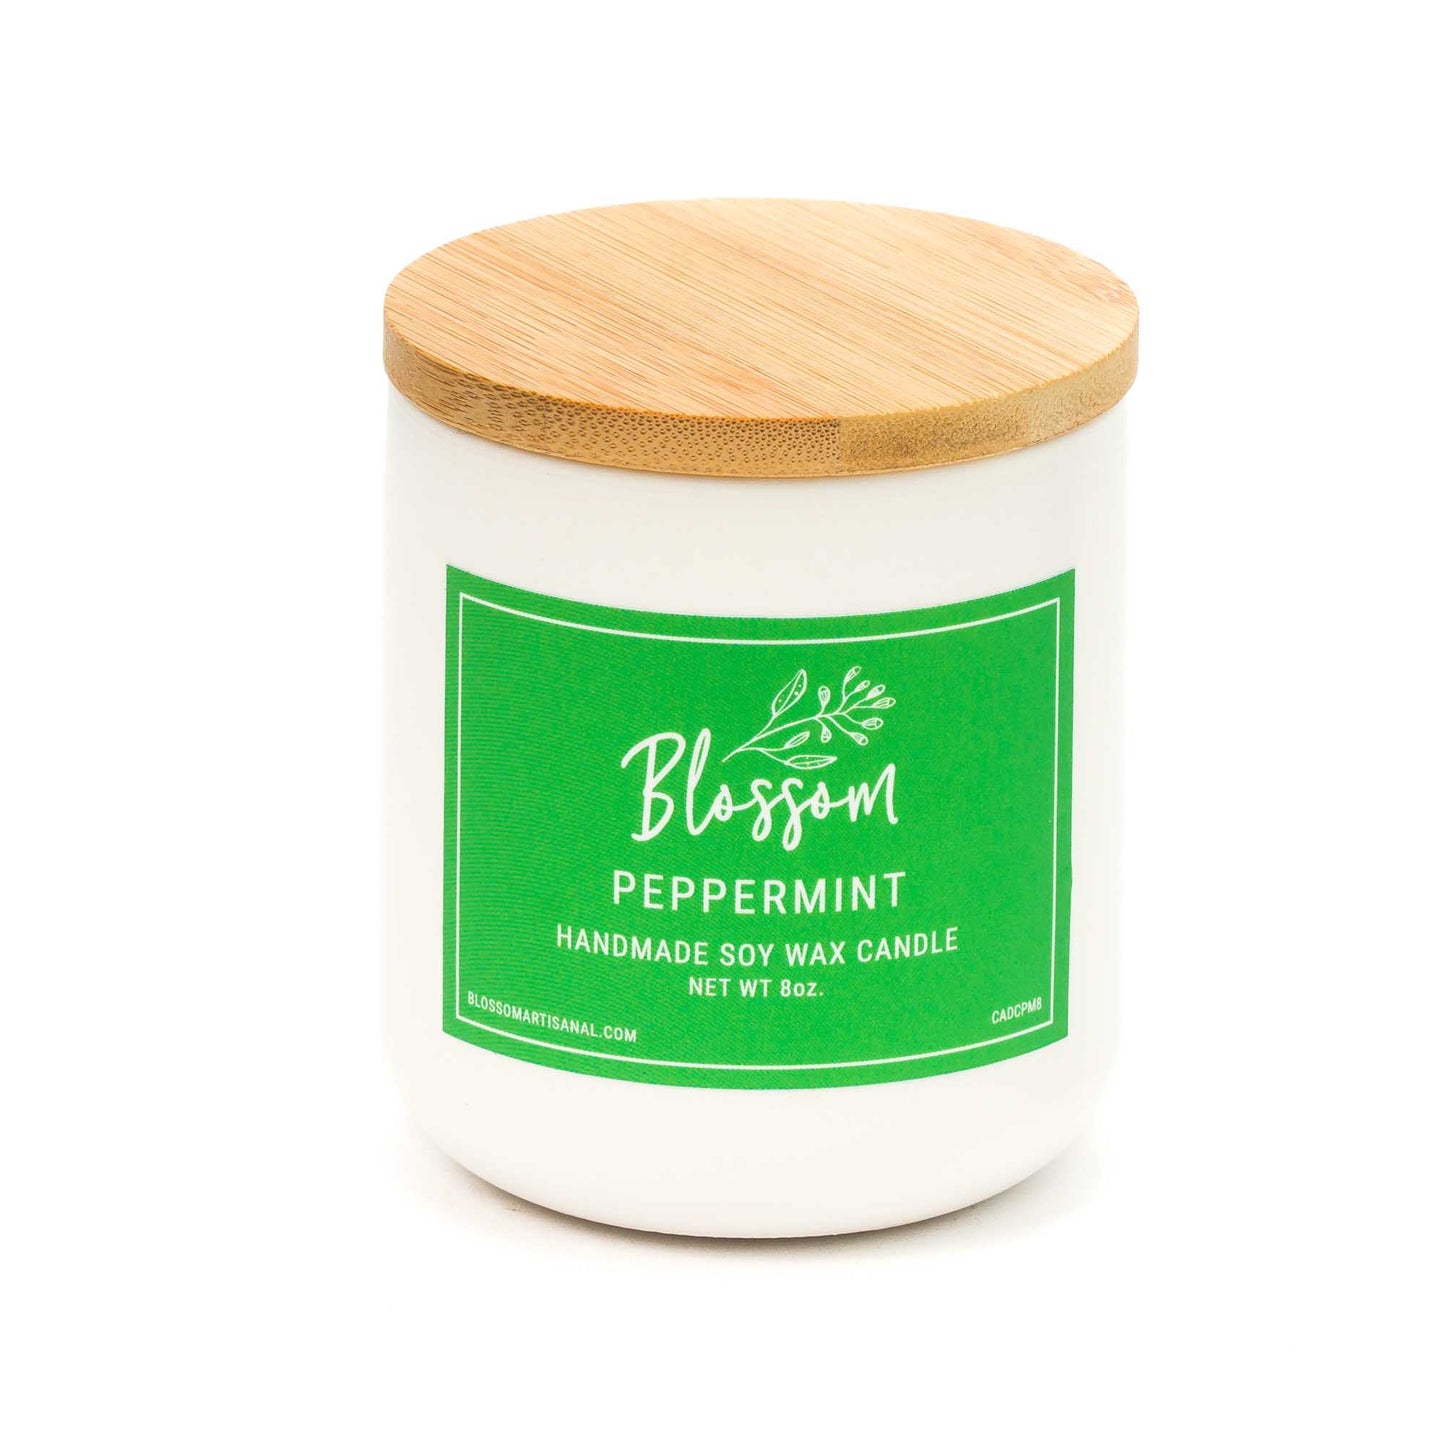 White Ceramic Decorative Soy Wax Candle Peppermint Essential Oil Scent 8oz